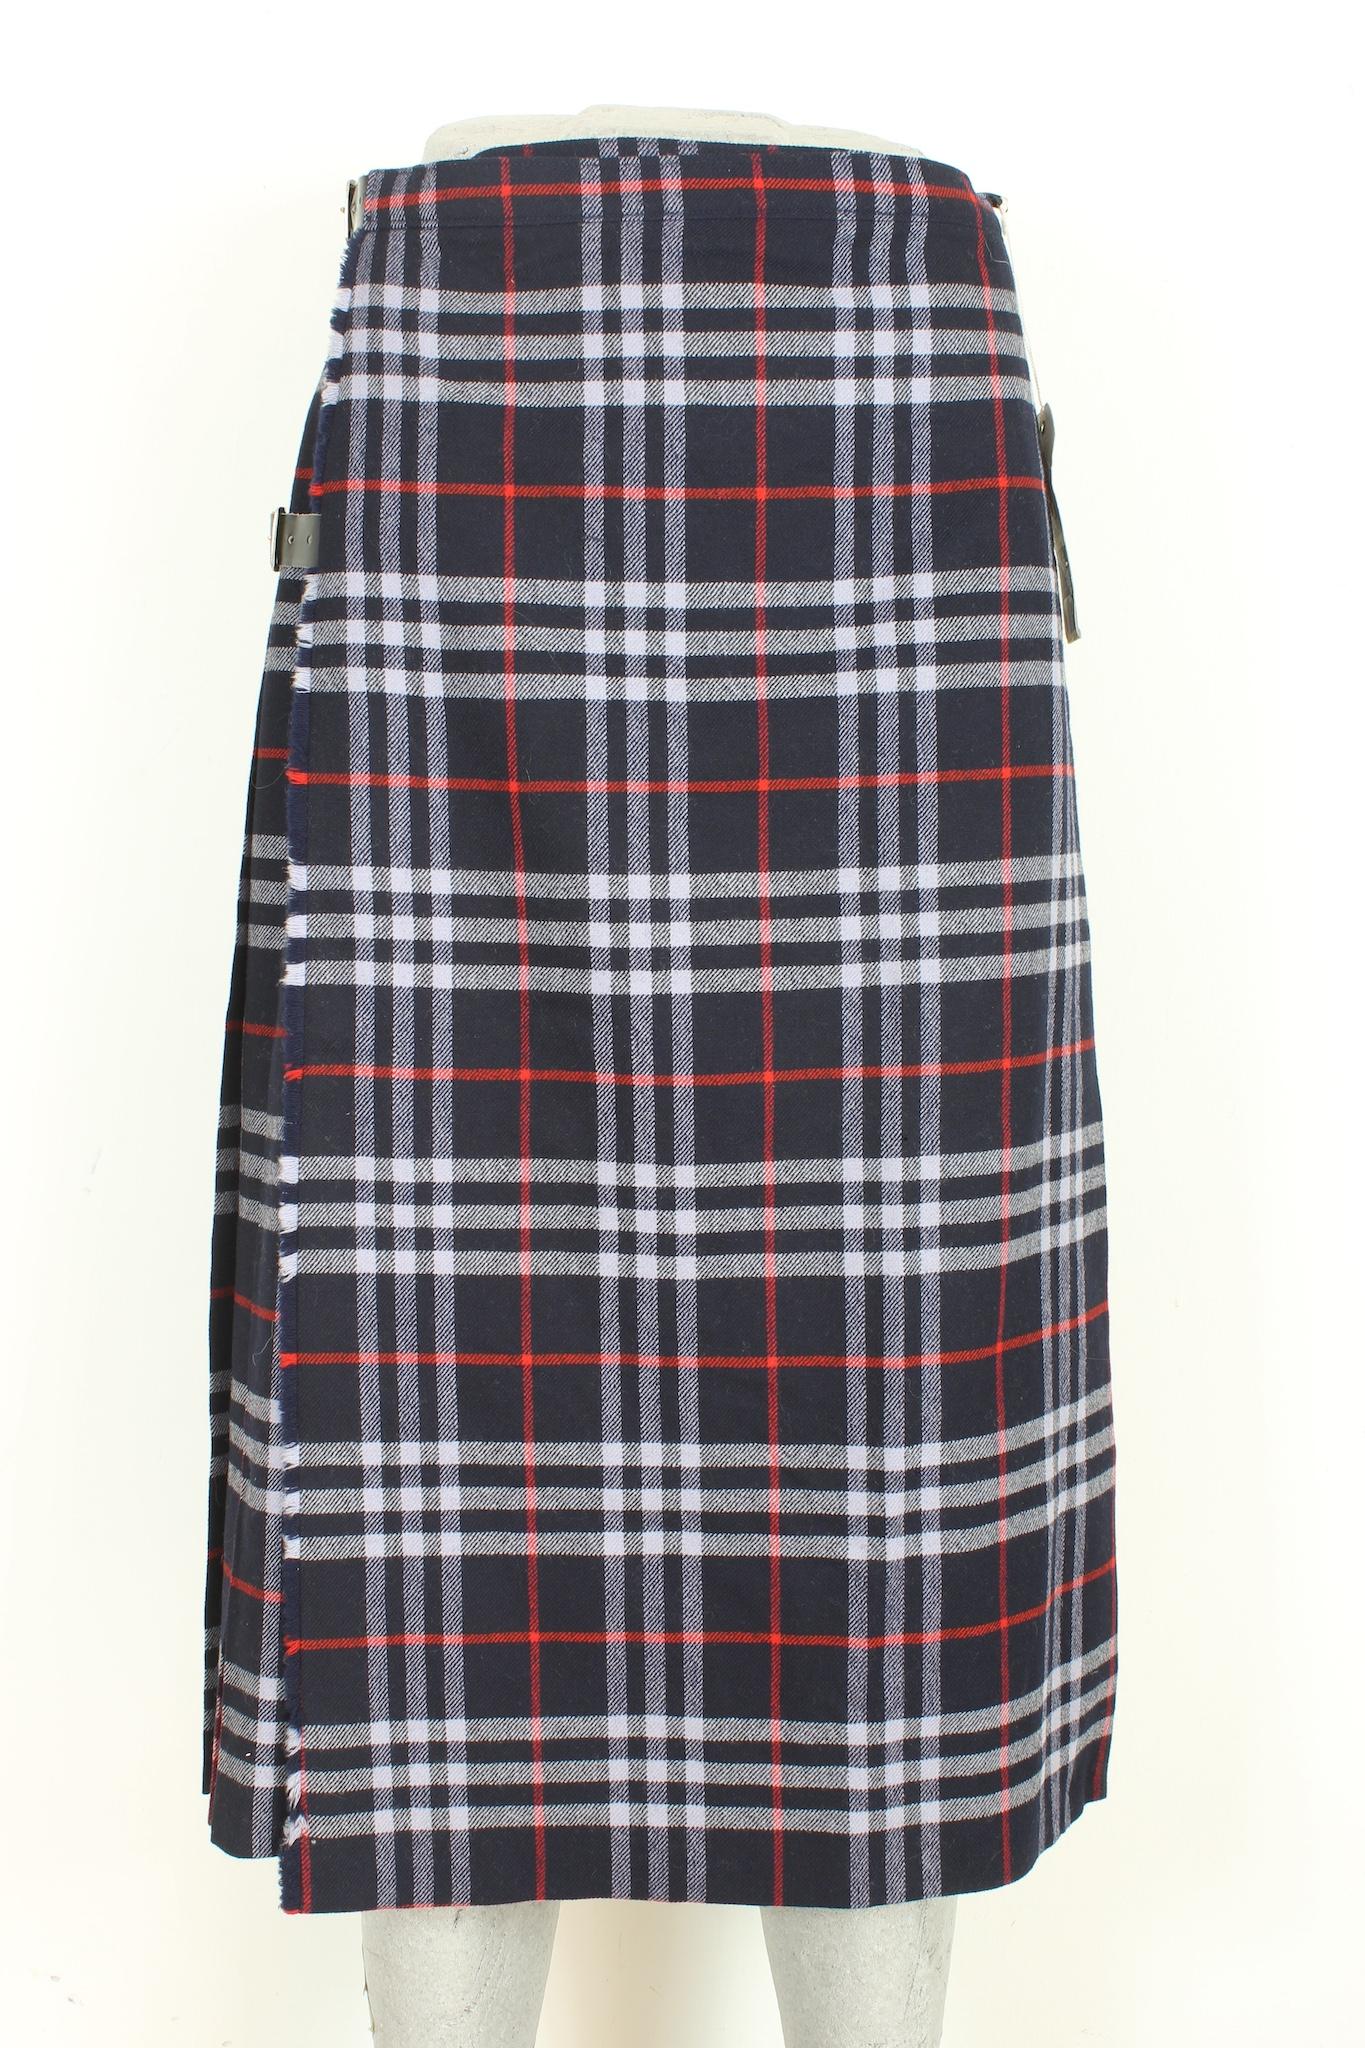 Burberry vintage 80s kilt skirt. Pleated skirt, blue and red with typical checked pattern of the fashion house. Closure with side leather straps. 100% wool fabric. Made in England.

Size: 42 It 8 Us 10 Uk

Waist: 34 cm
Length: 72 cm